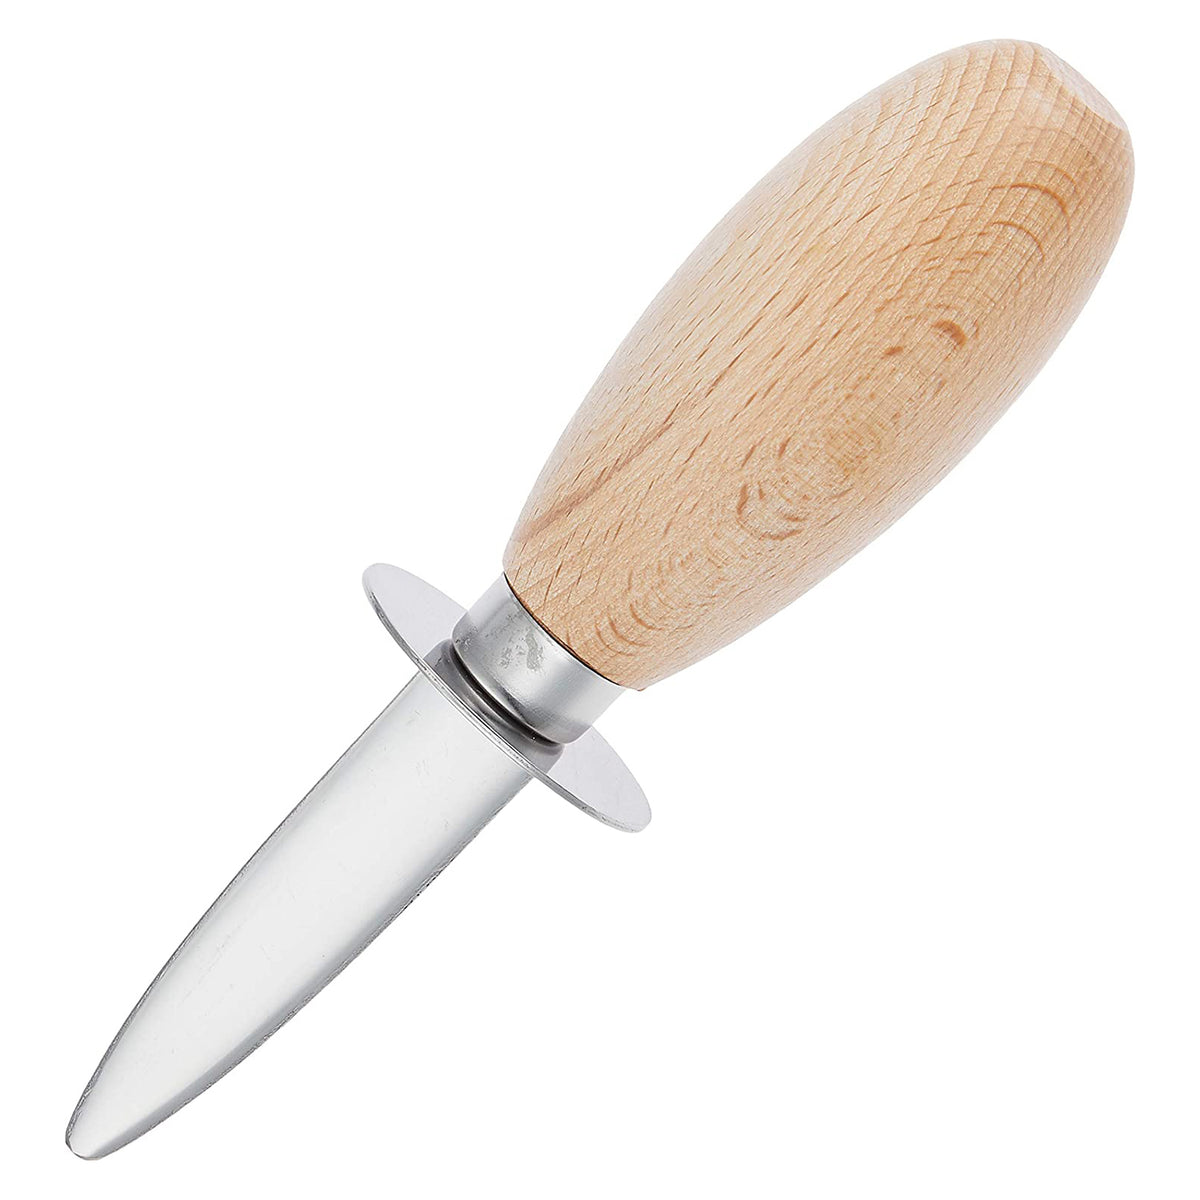 SUNCRAFT Stainless Steel Oyster Knife